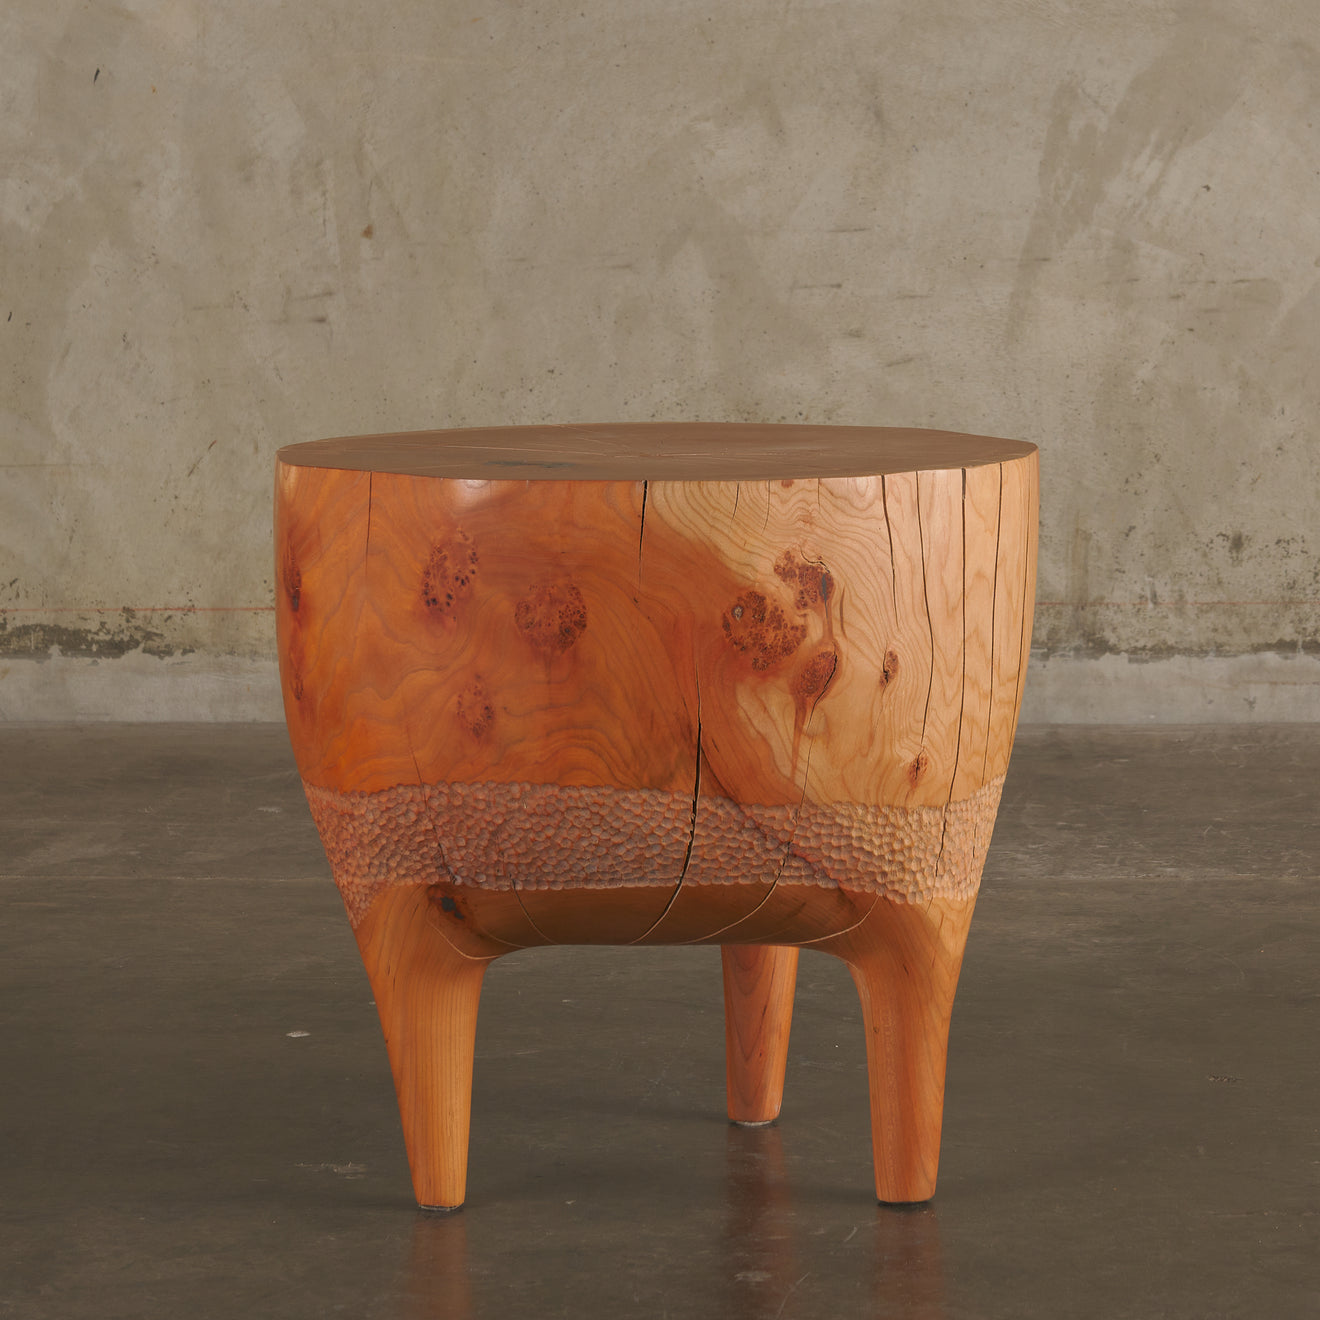 CHERRY TEXTURED SIDE TABLE BY IAN LOVE